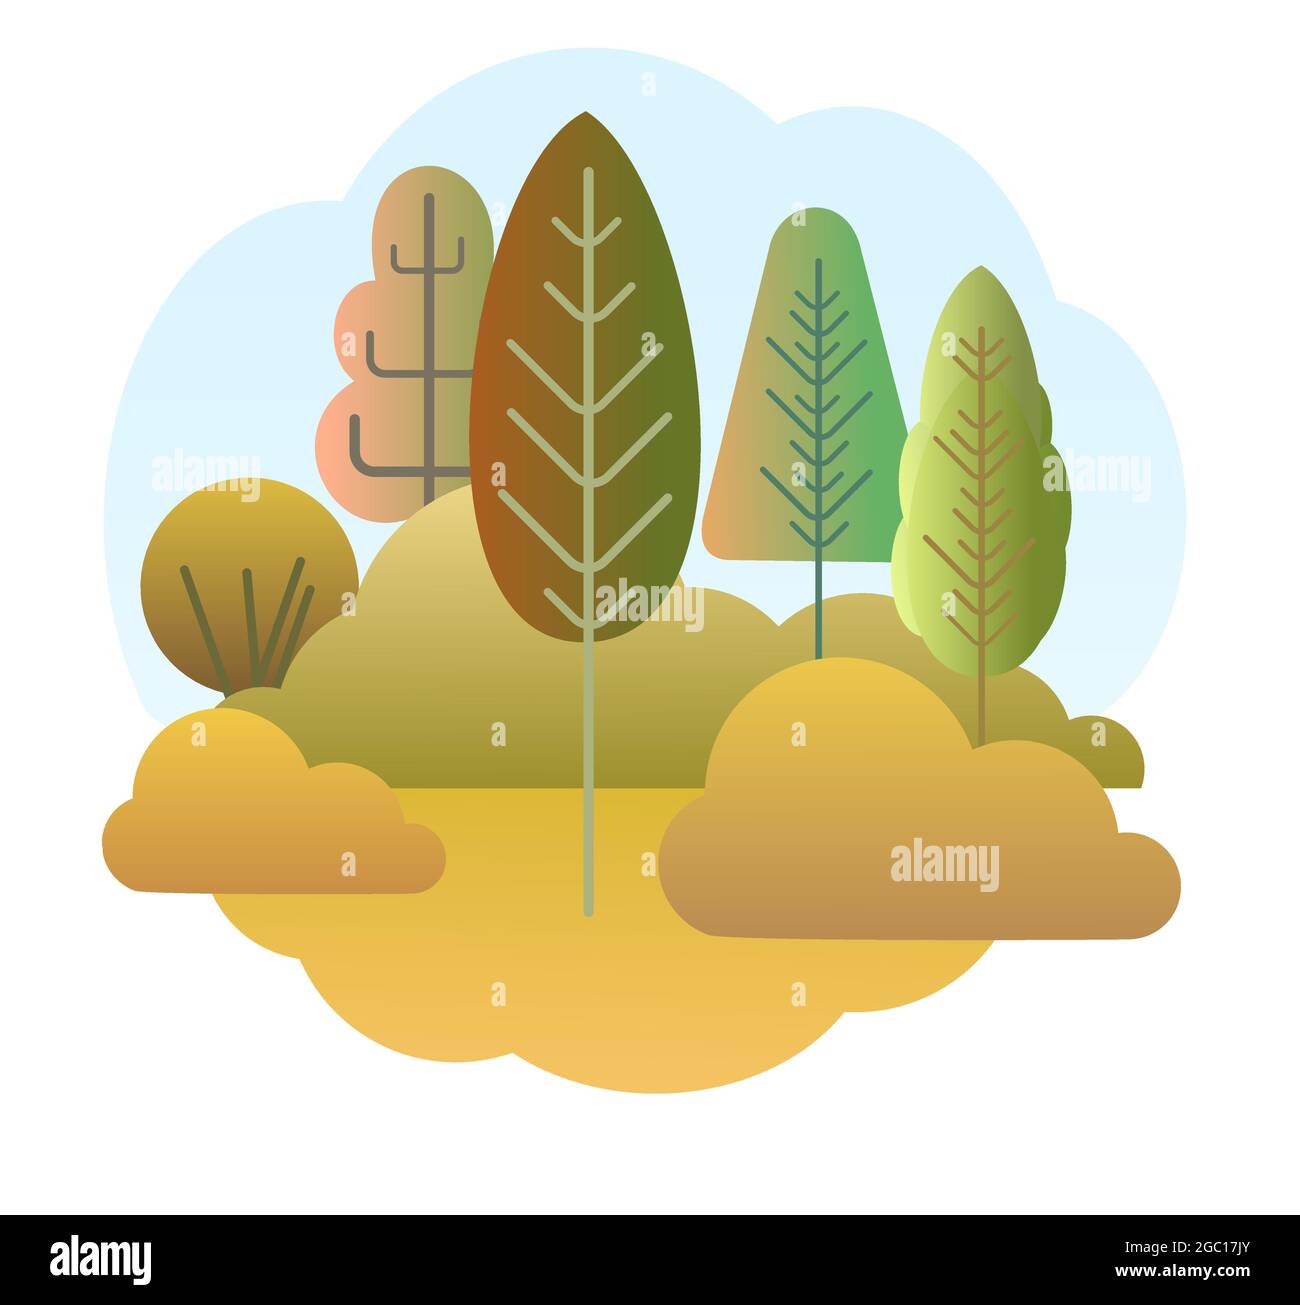 Autumn forest. Flat style symbolic illustration. Landscape in orange, yellow and green tones. Rural wildlife. Country scene with trees. Beautiful art Stock Vector